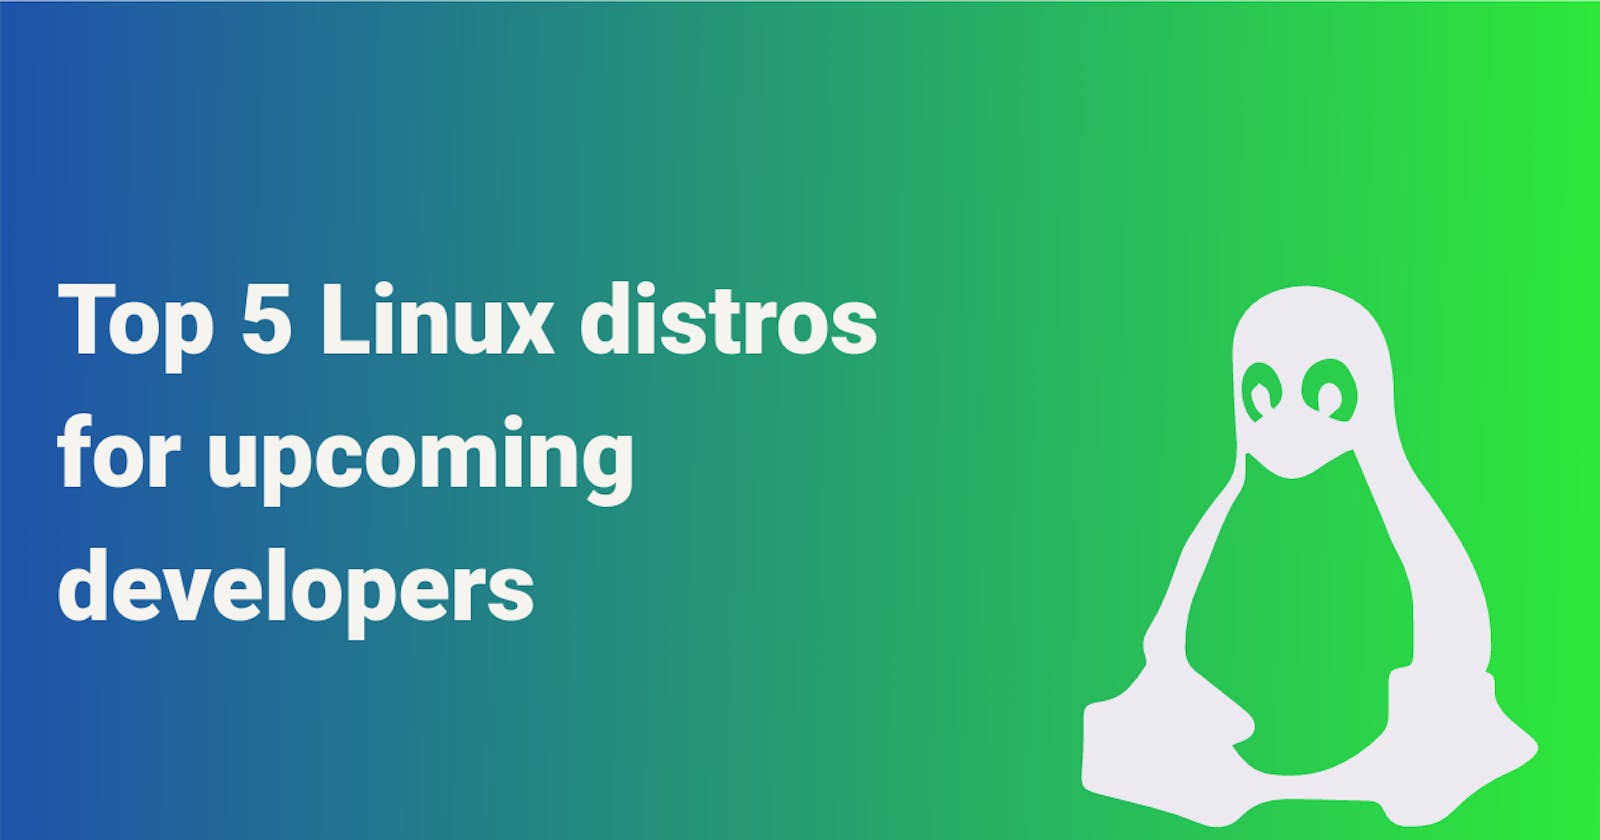 Top 5 Linux distros for upcoming developers